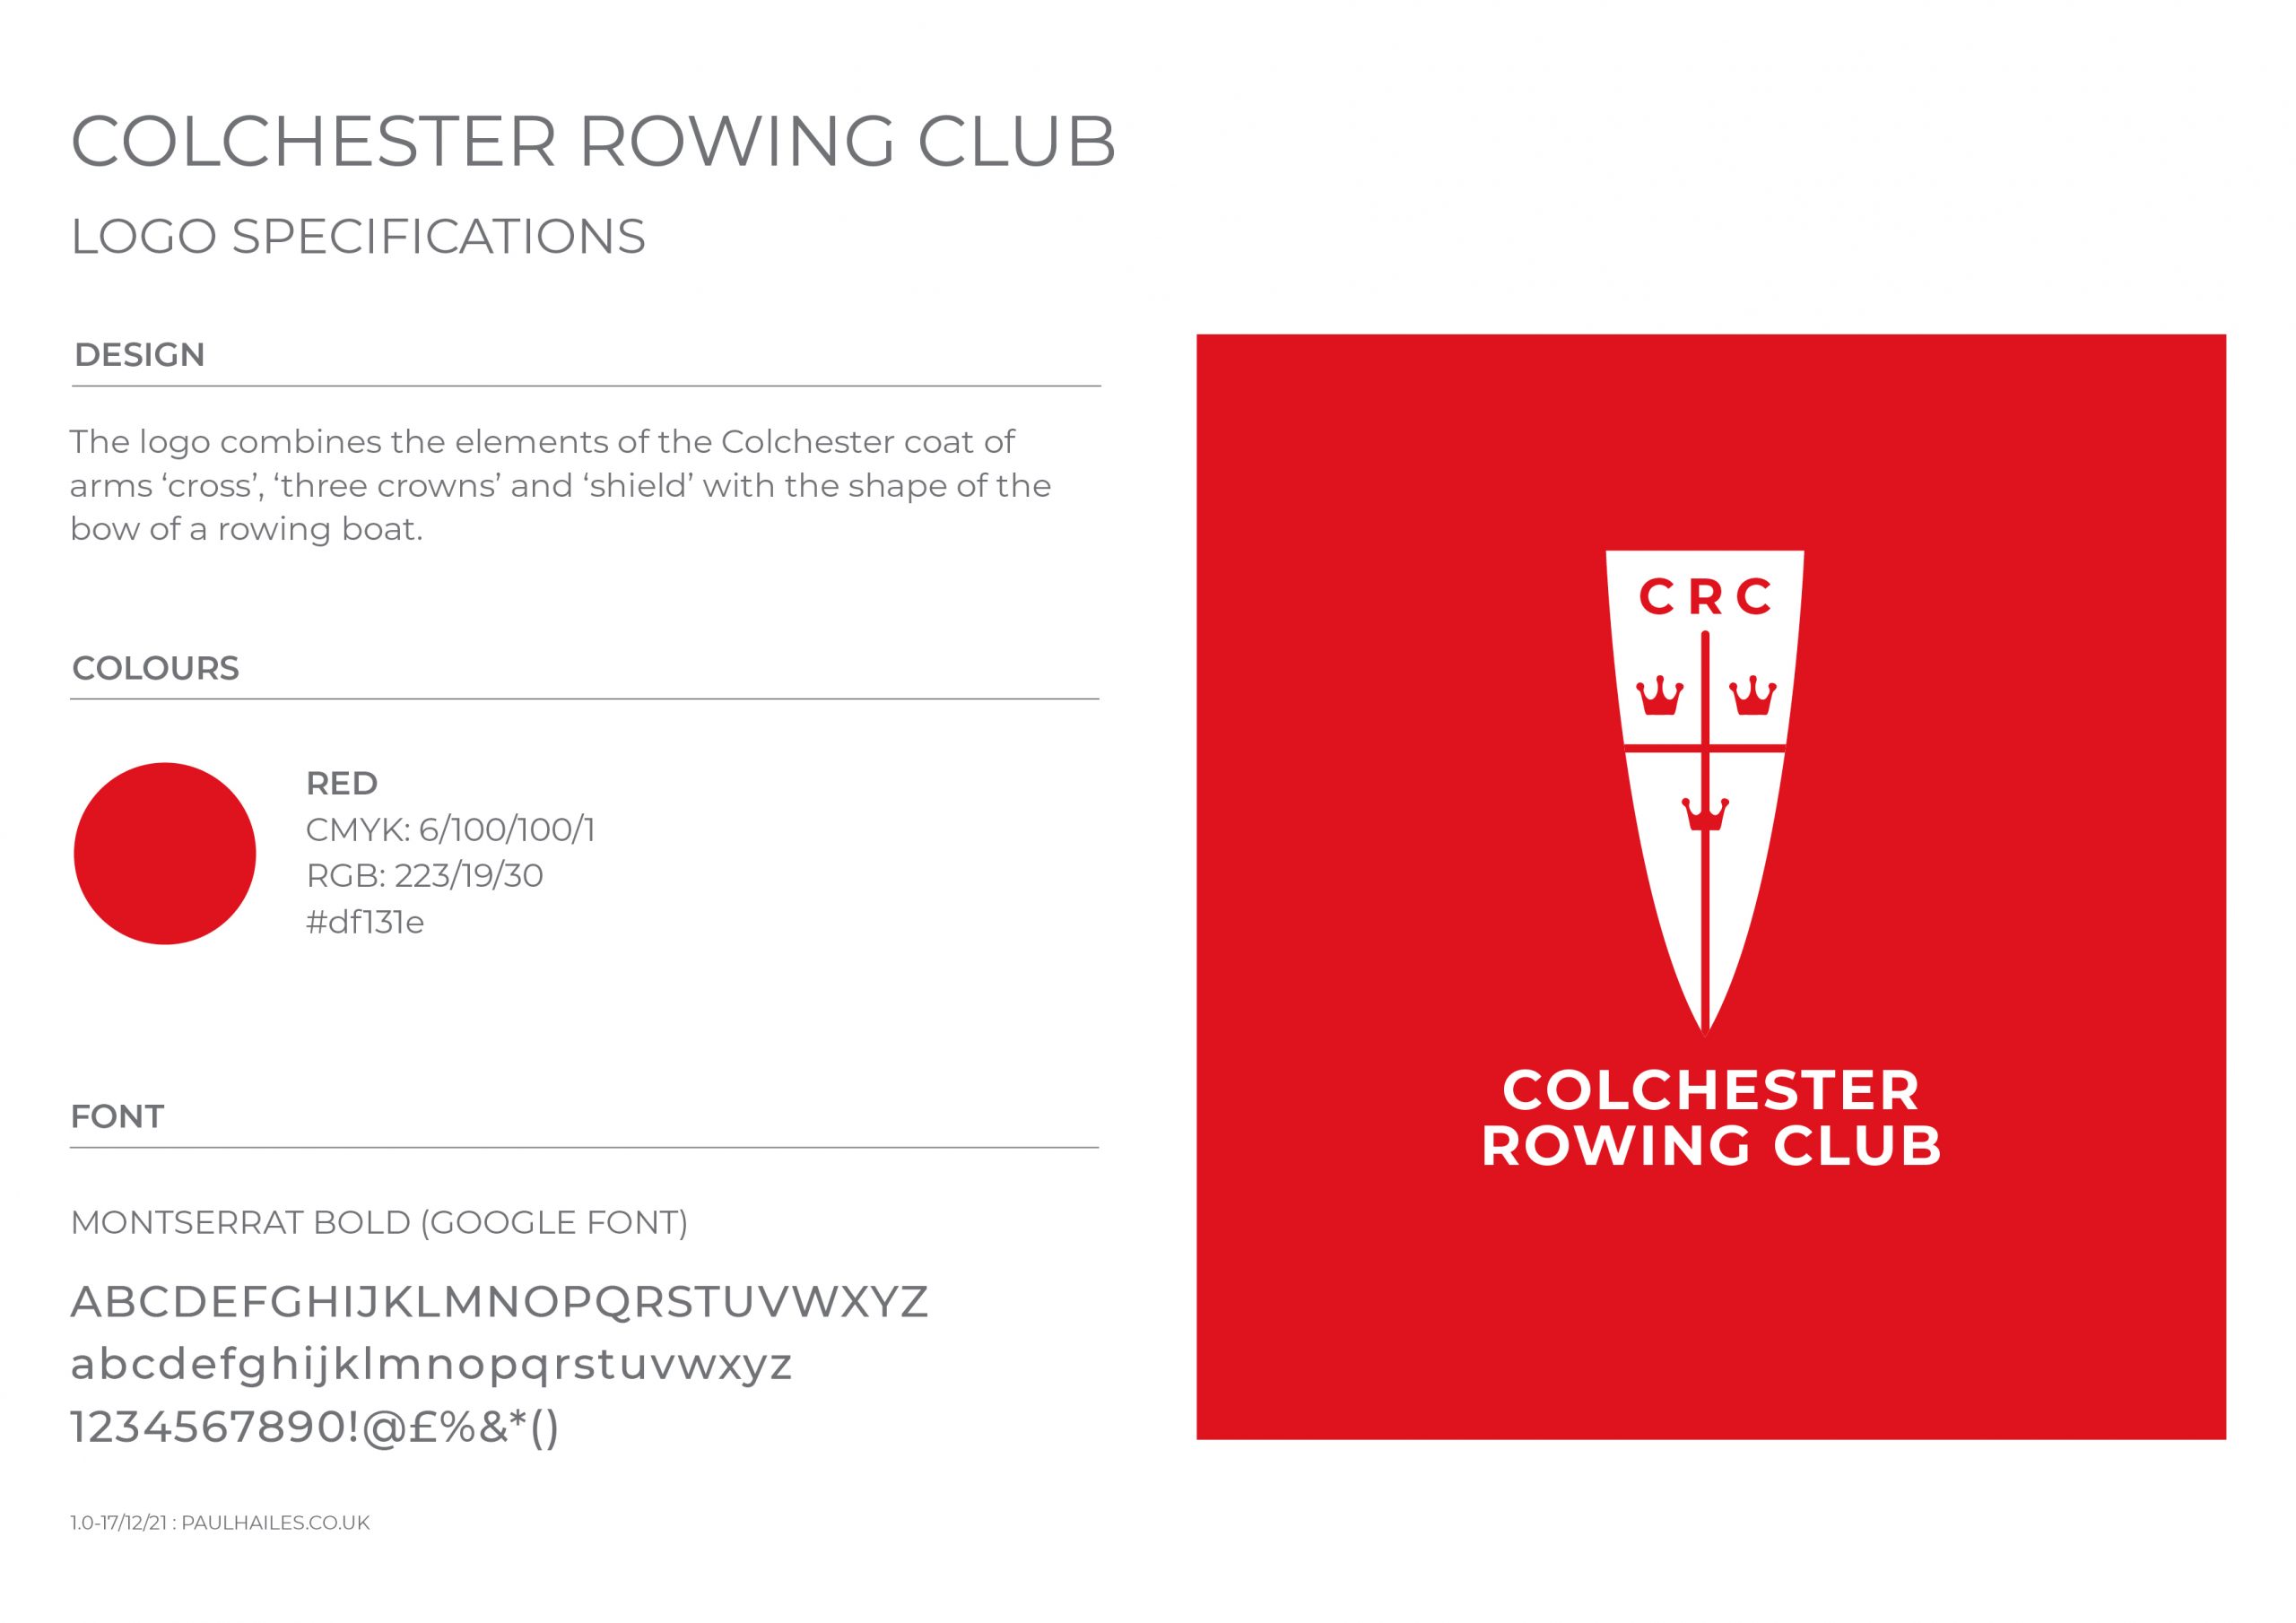 Image of Paul Hailes Design work for Colchester Rowing Club brand guidelines document.